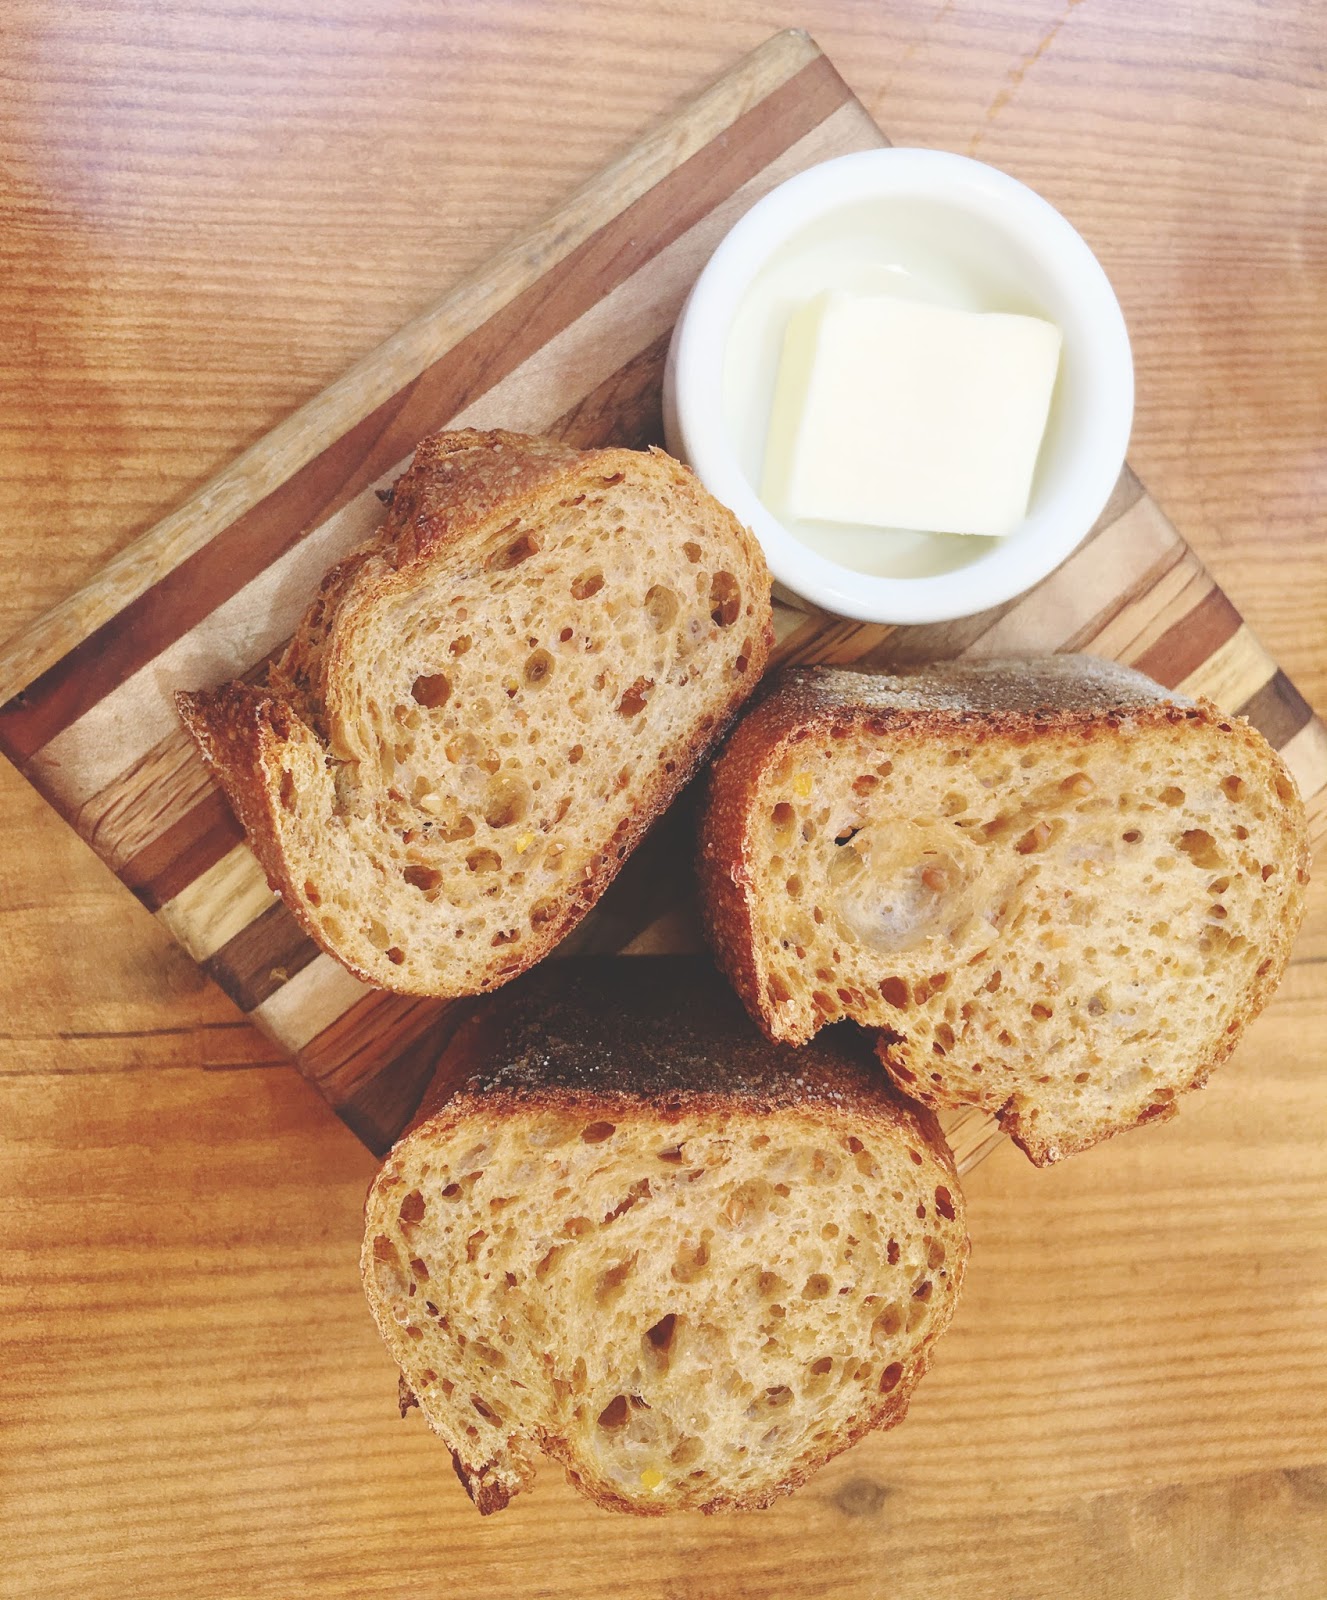 bread at The Girl and the Fig - A restaurant in Sonoma, California